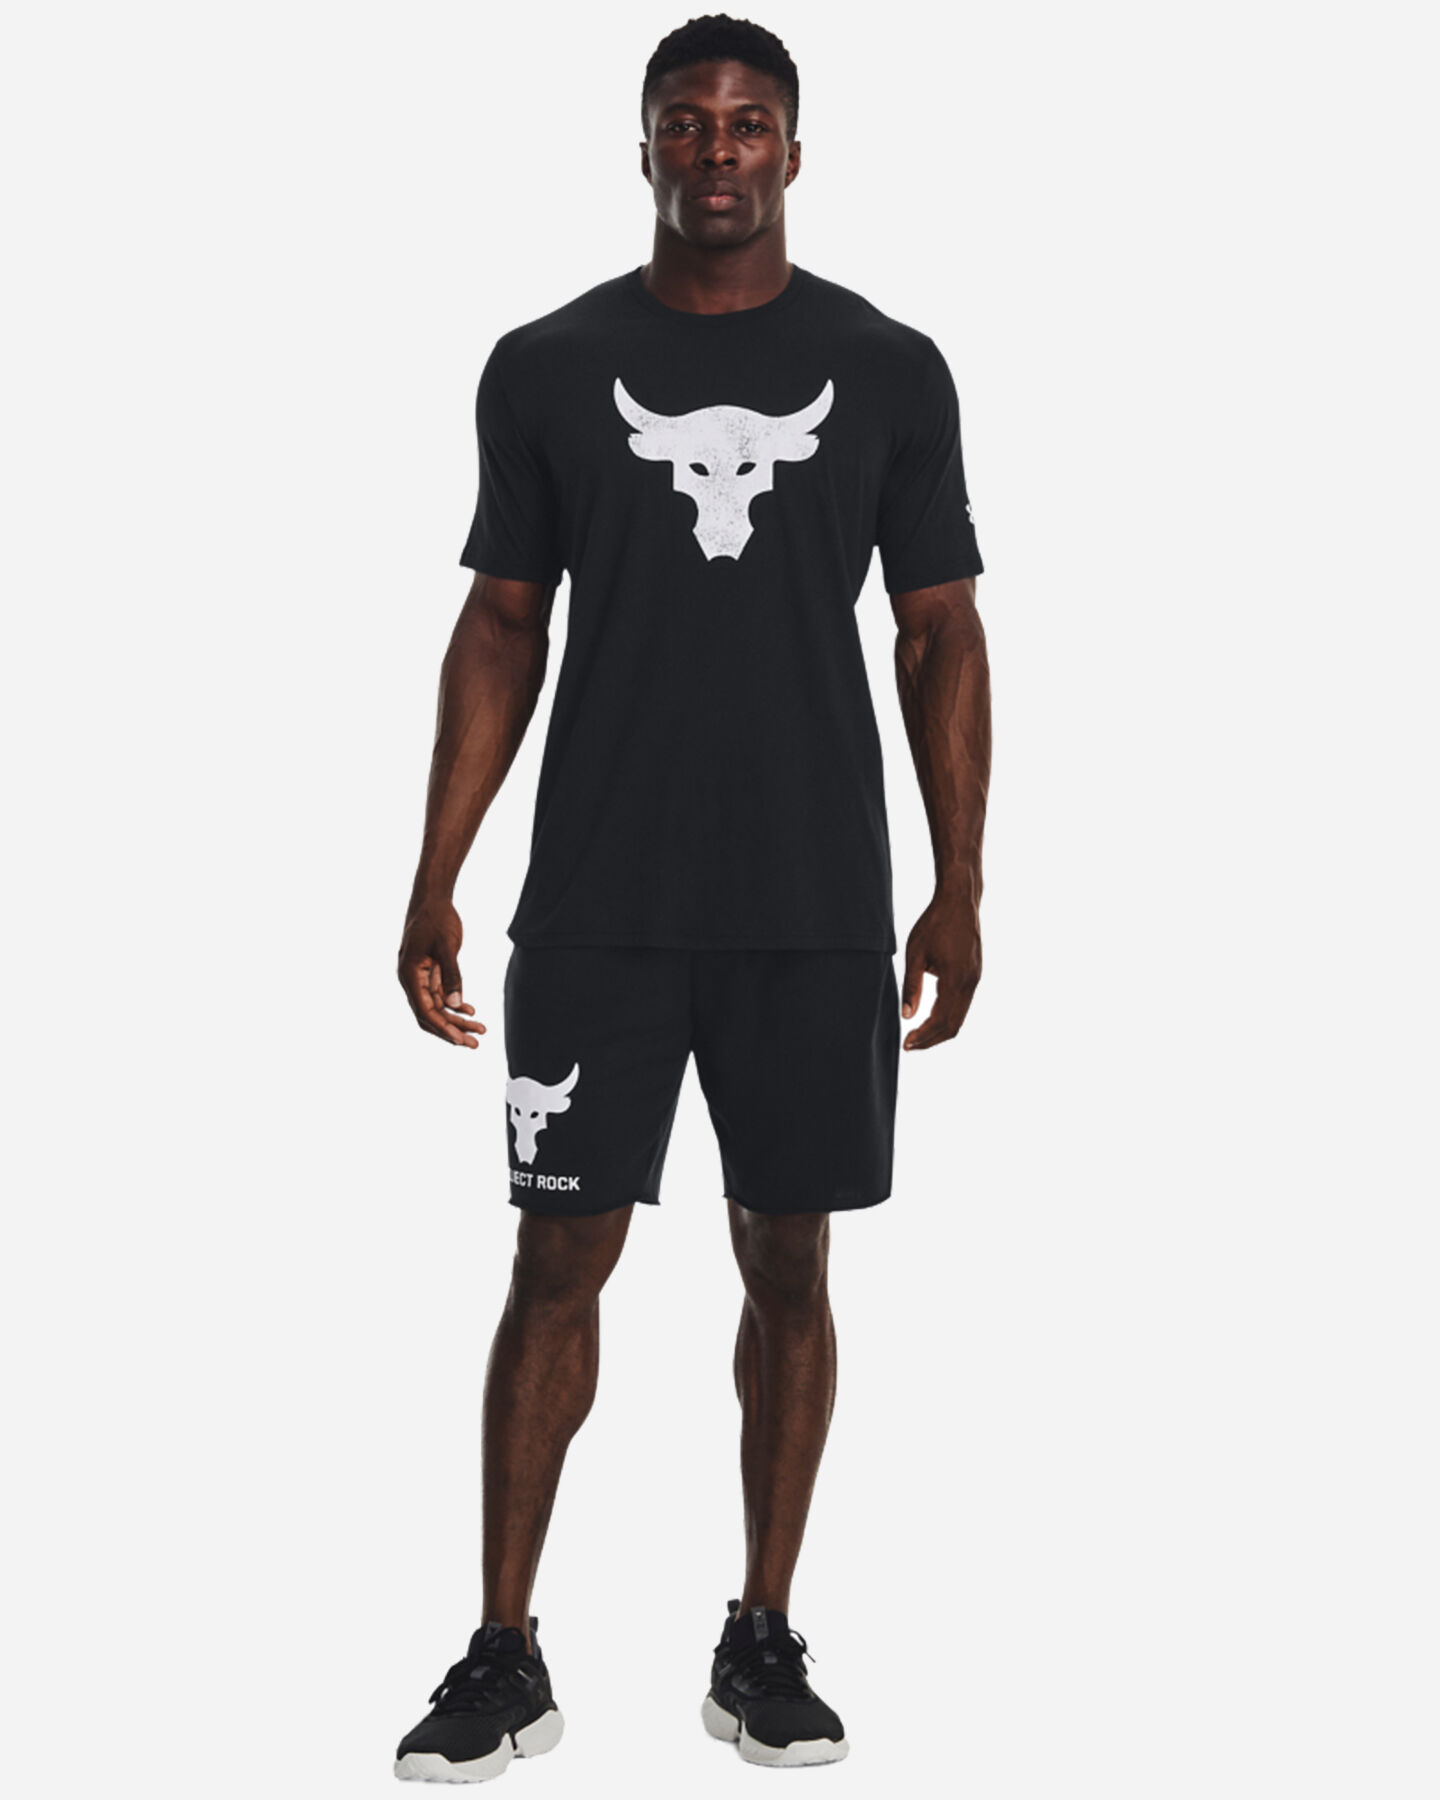  T-Shirt UNDER ARMOUR THE ROCK BRAHMA BULL M S5527821|0003|XS scatto 4